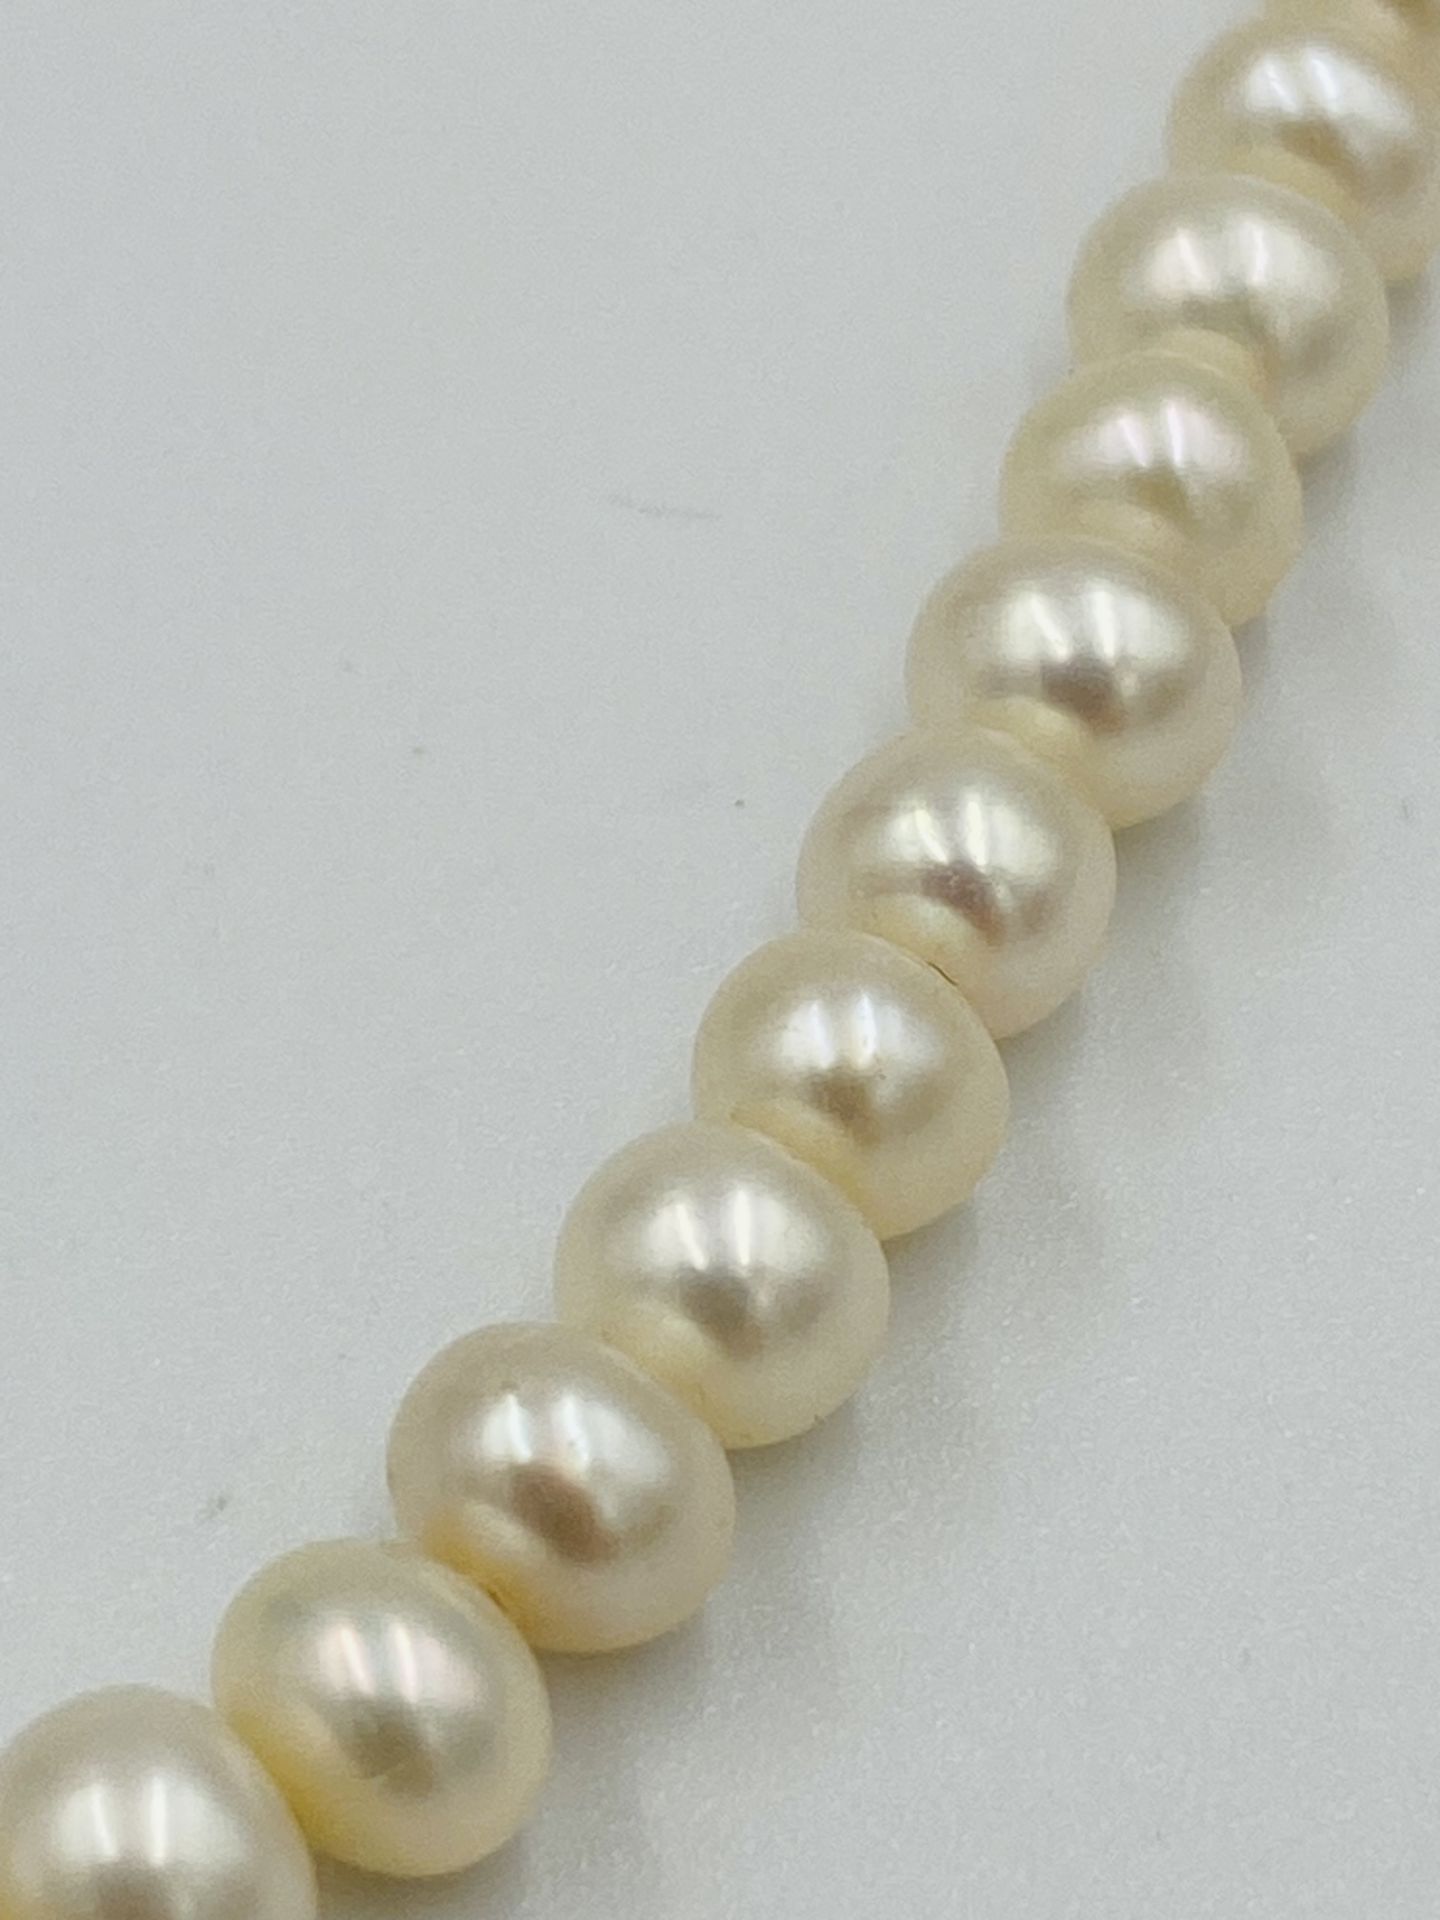 Pearl necklace with 14ct gold and amethyst pendant and 14ct gold clasp - Image 4 of 4